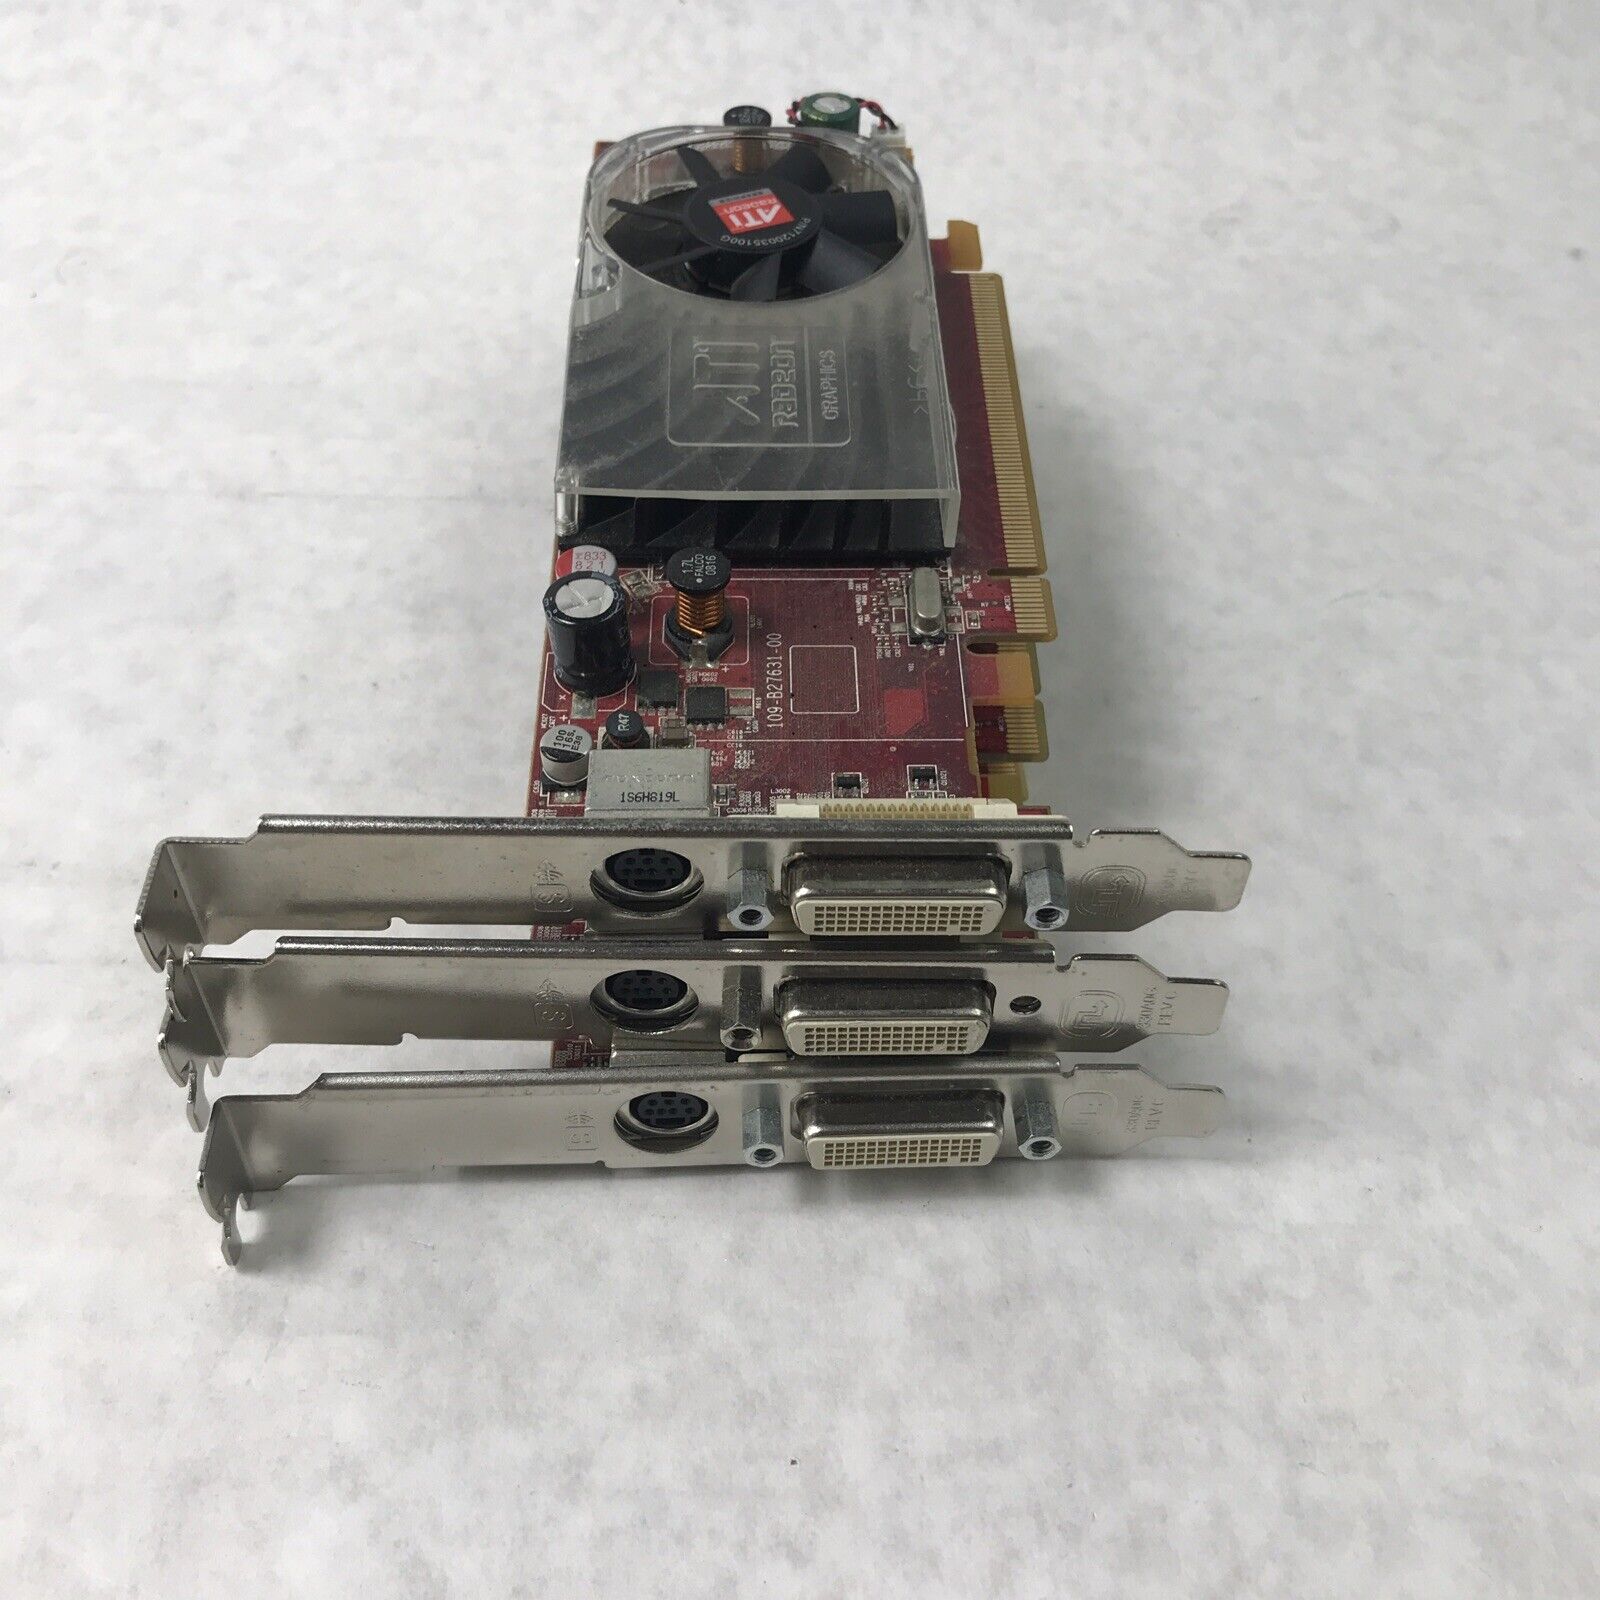 (Lot of 3) Dell ATI Radeon FM351 PCI 256MB Graphics Card (Tested and Working)